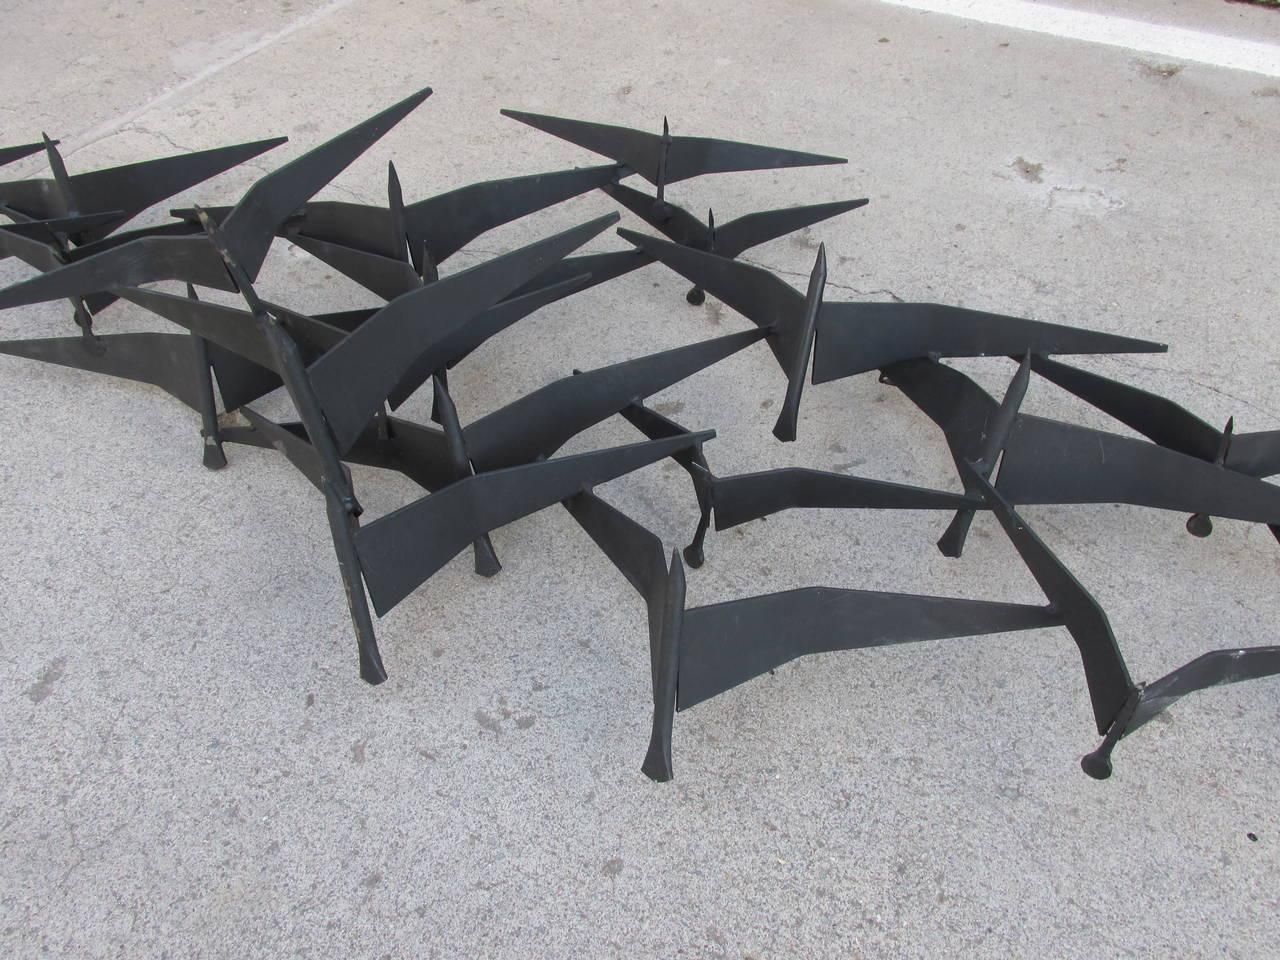 Birds In Flight Metal Wall Artcurtis Jere At 1stdibs With Regard To Metal Wall Art Birds In Flight (Photo 4 of 20)